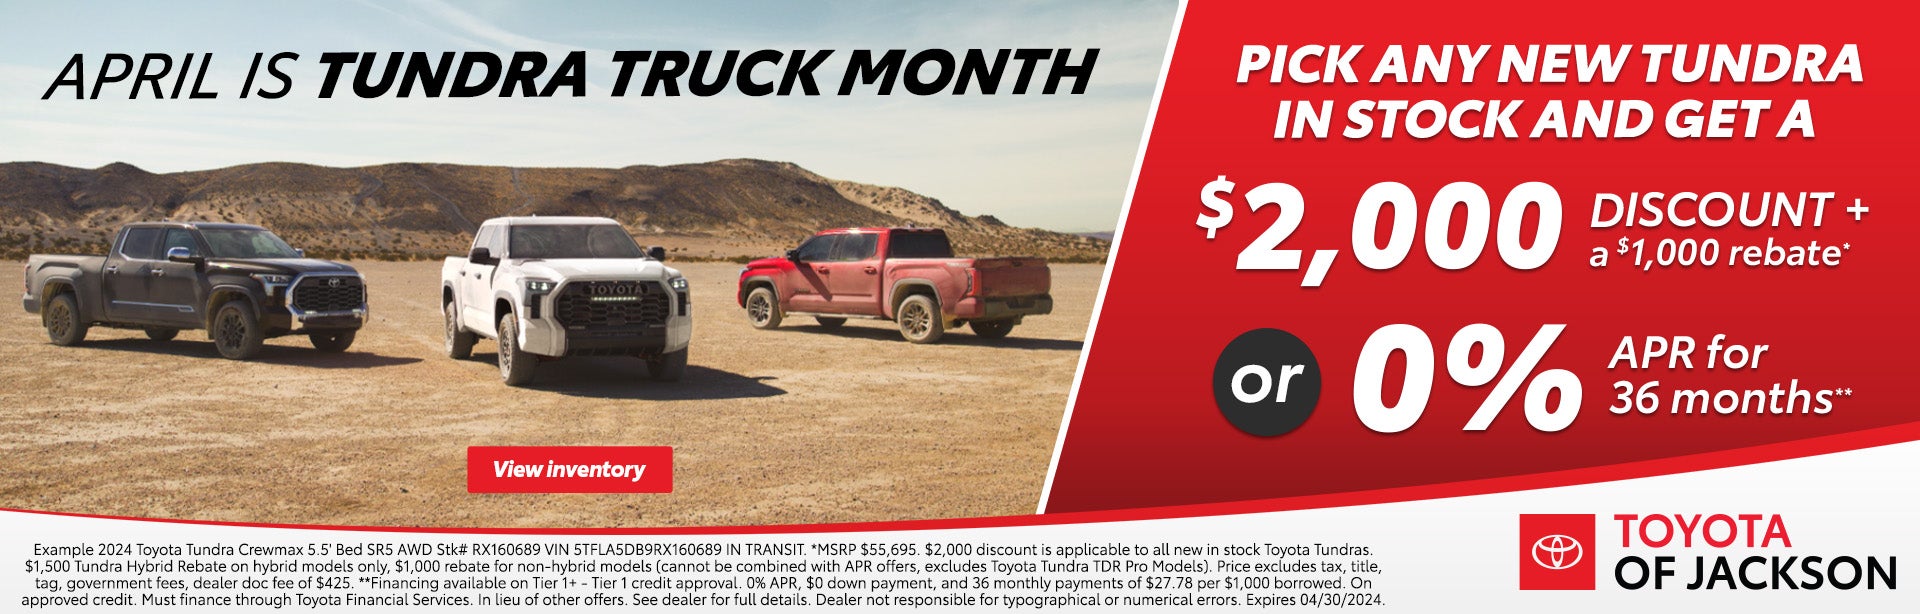 April is Tundra Truck Month